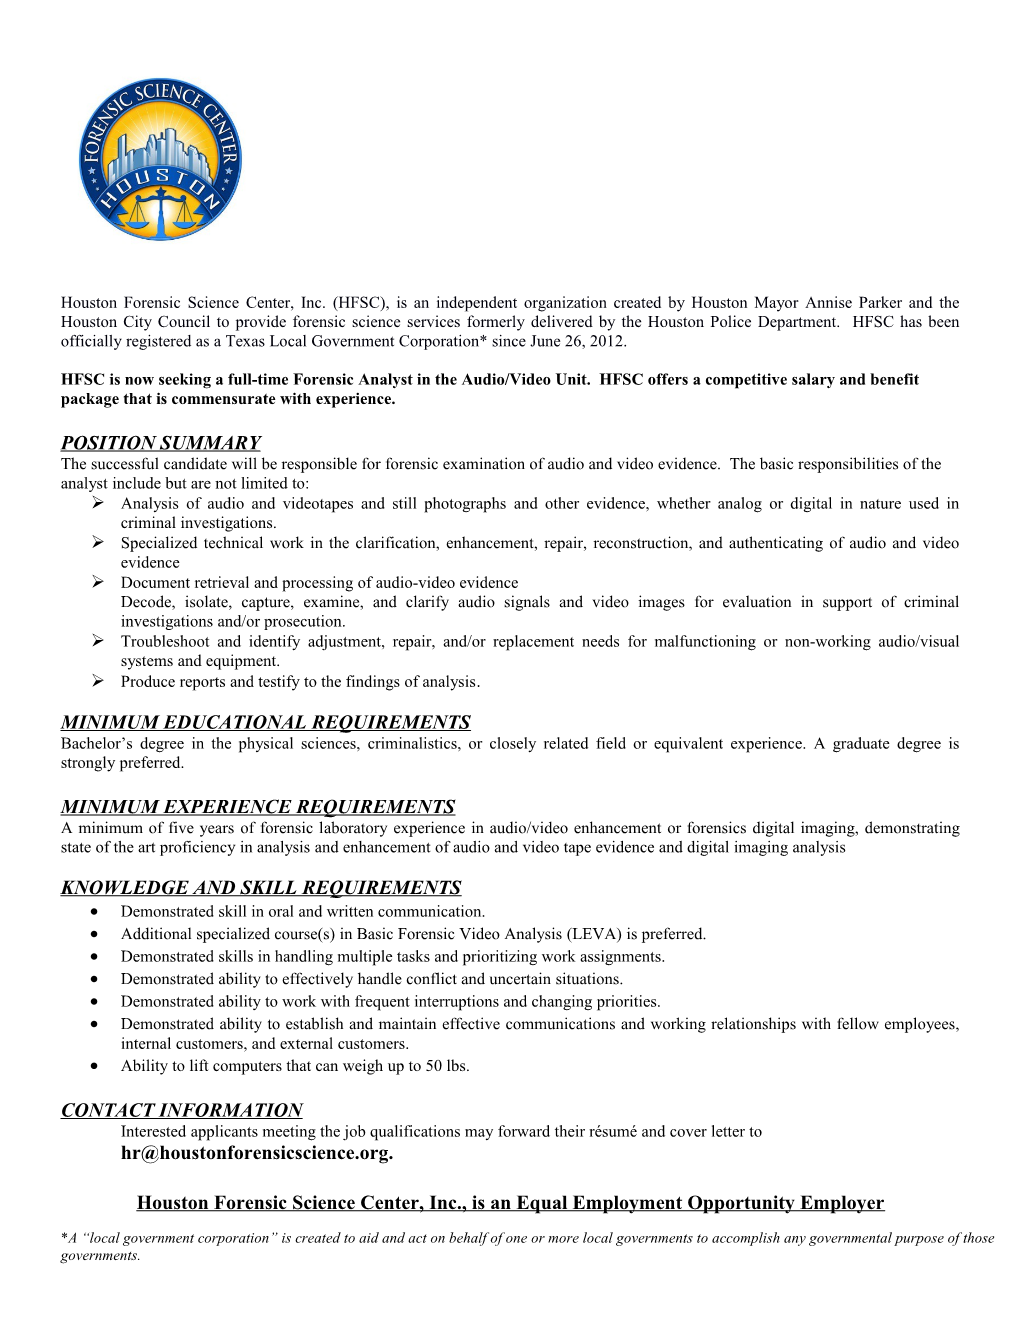 HFSC Is Now Seeking a Full-Time Forensic Analyst in the Audio/Video Unit. HFSC Offers